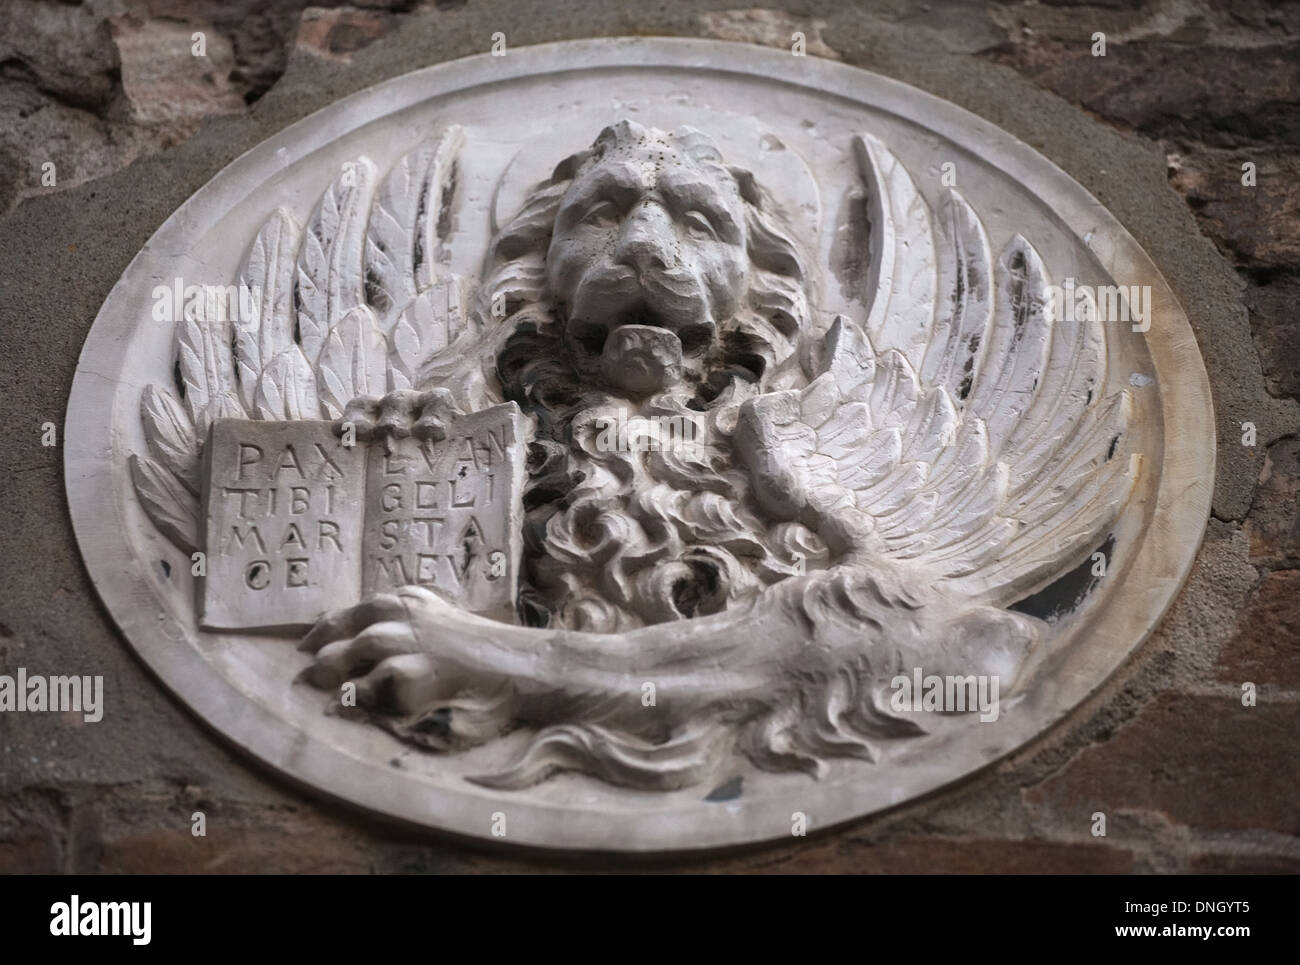 bas-relief of winged lion with the book and Pax tibi Marce, evangelista meus inscription, Venice, Italy Stock Photo